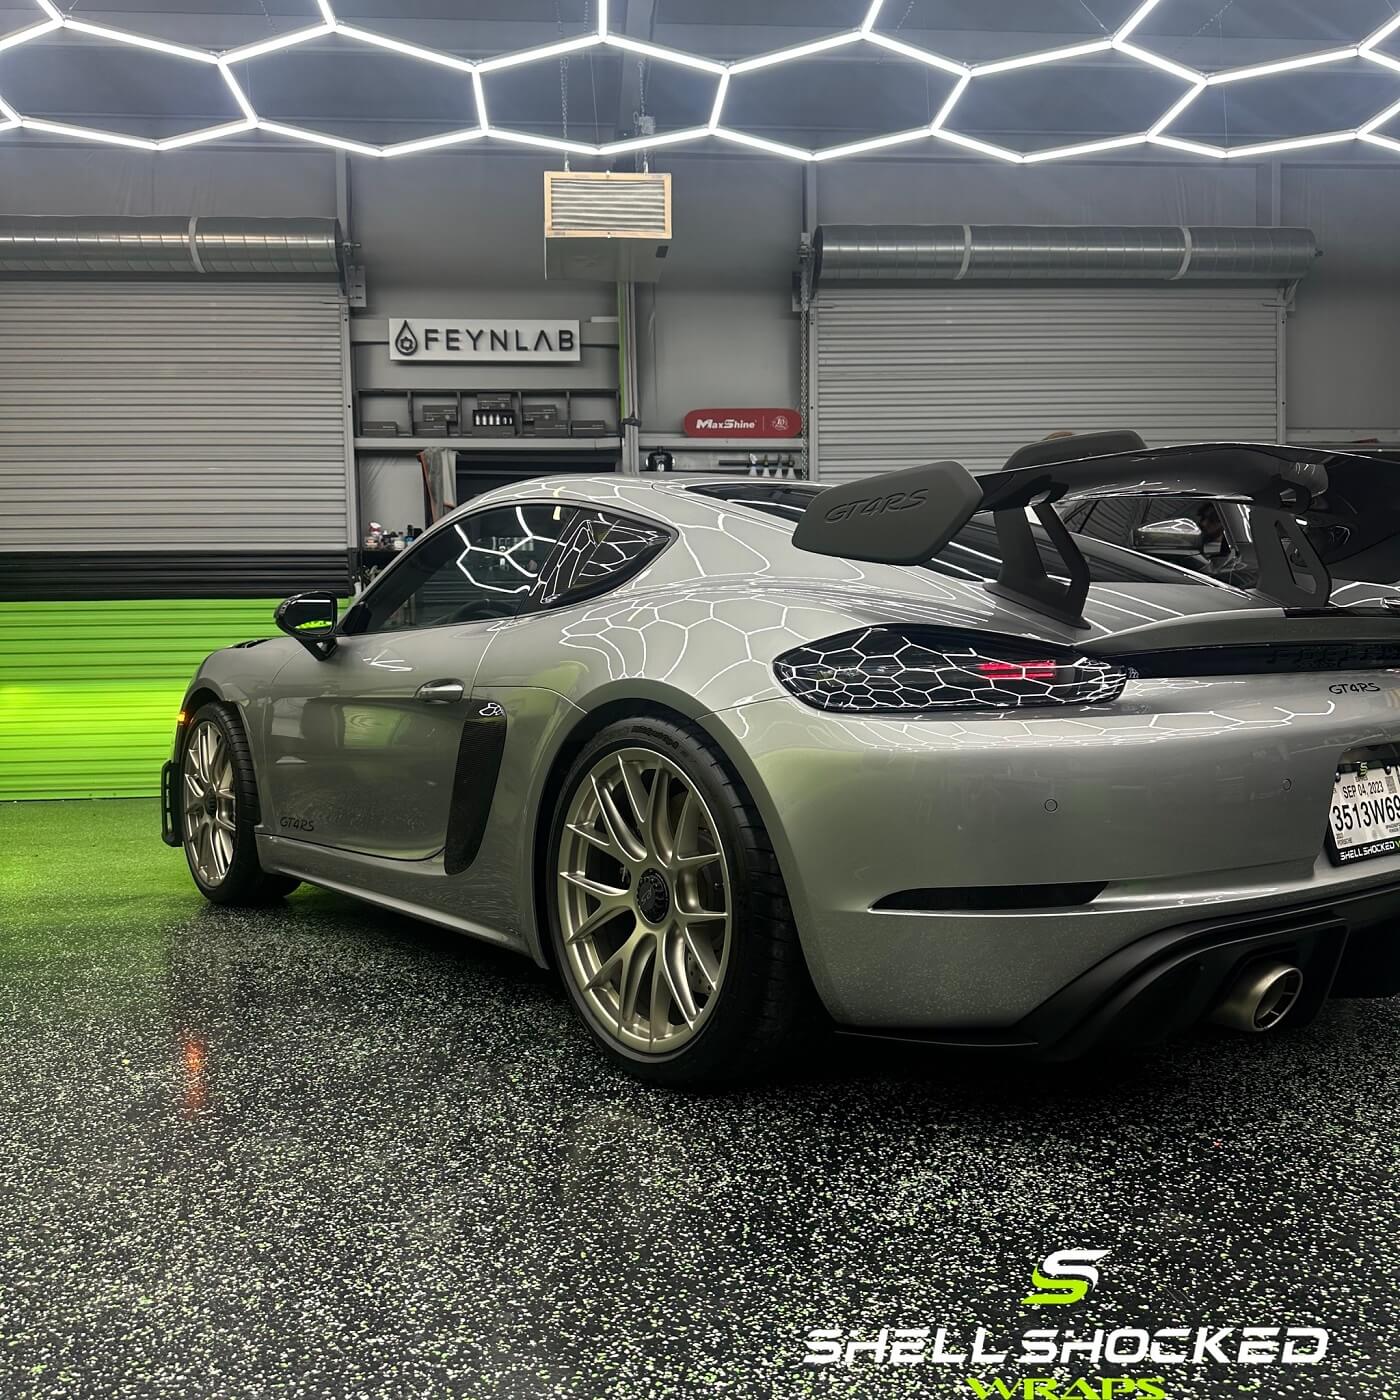 paint protection film installation - Shell Shocked Wraps is Wylie, Texas